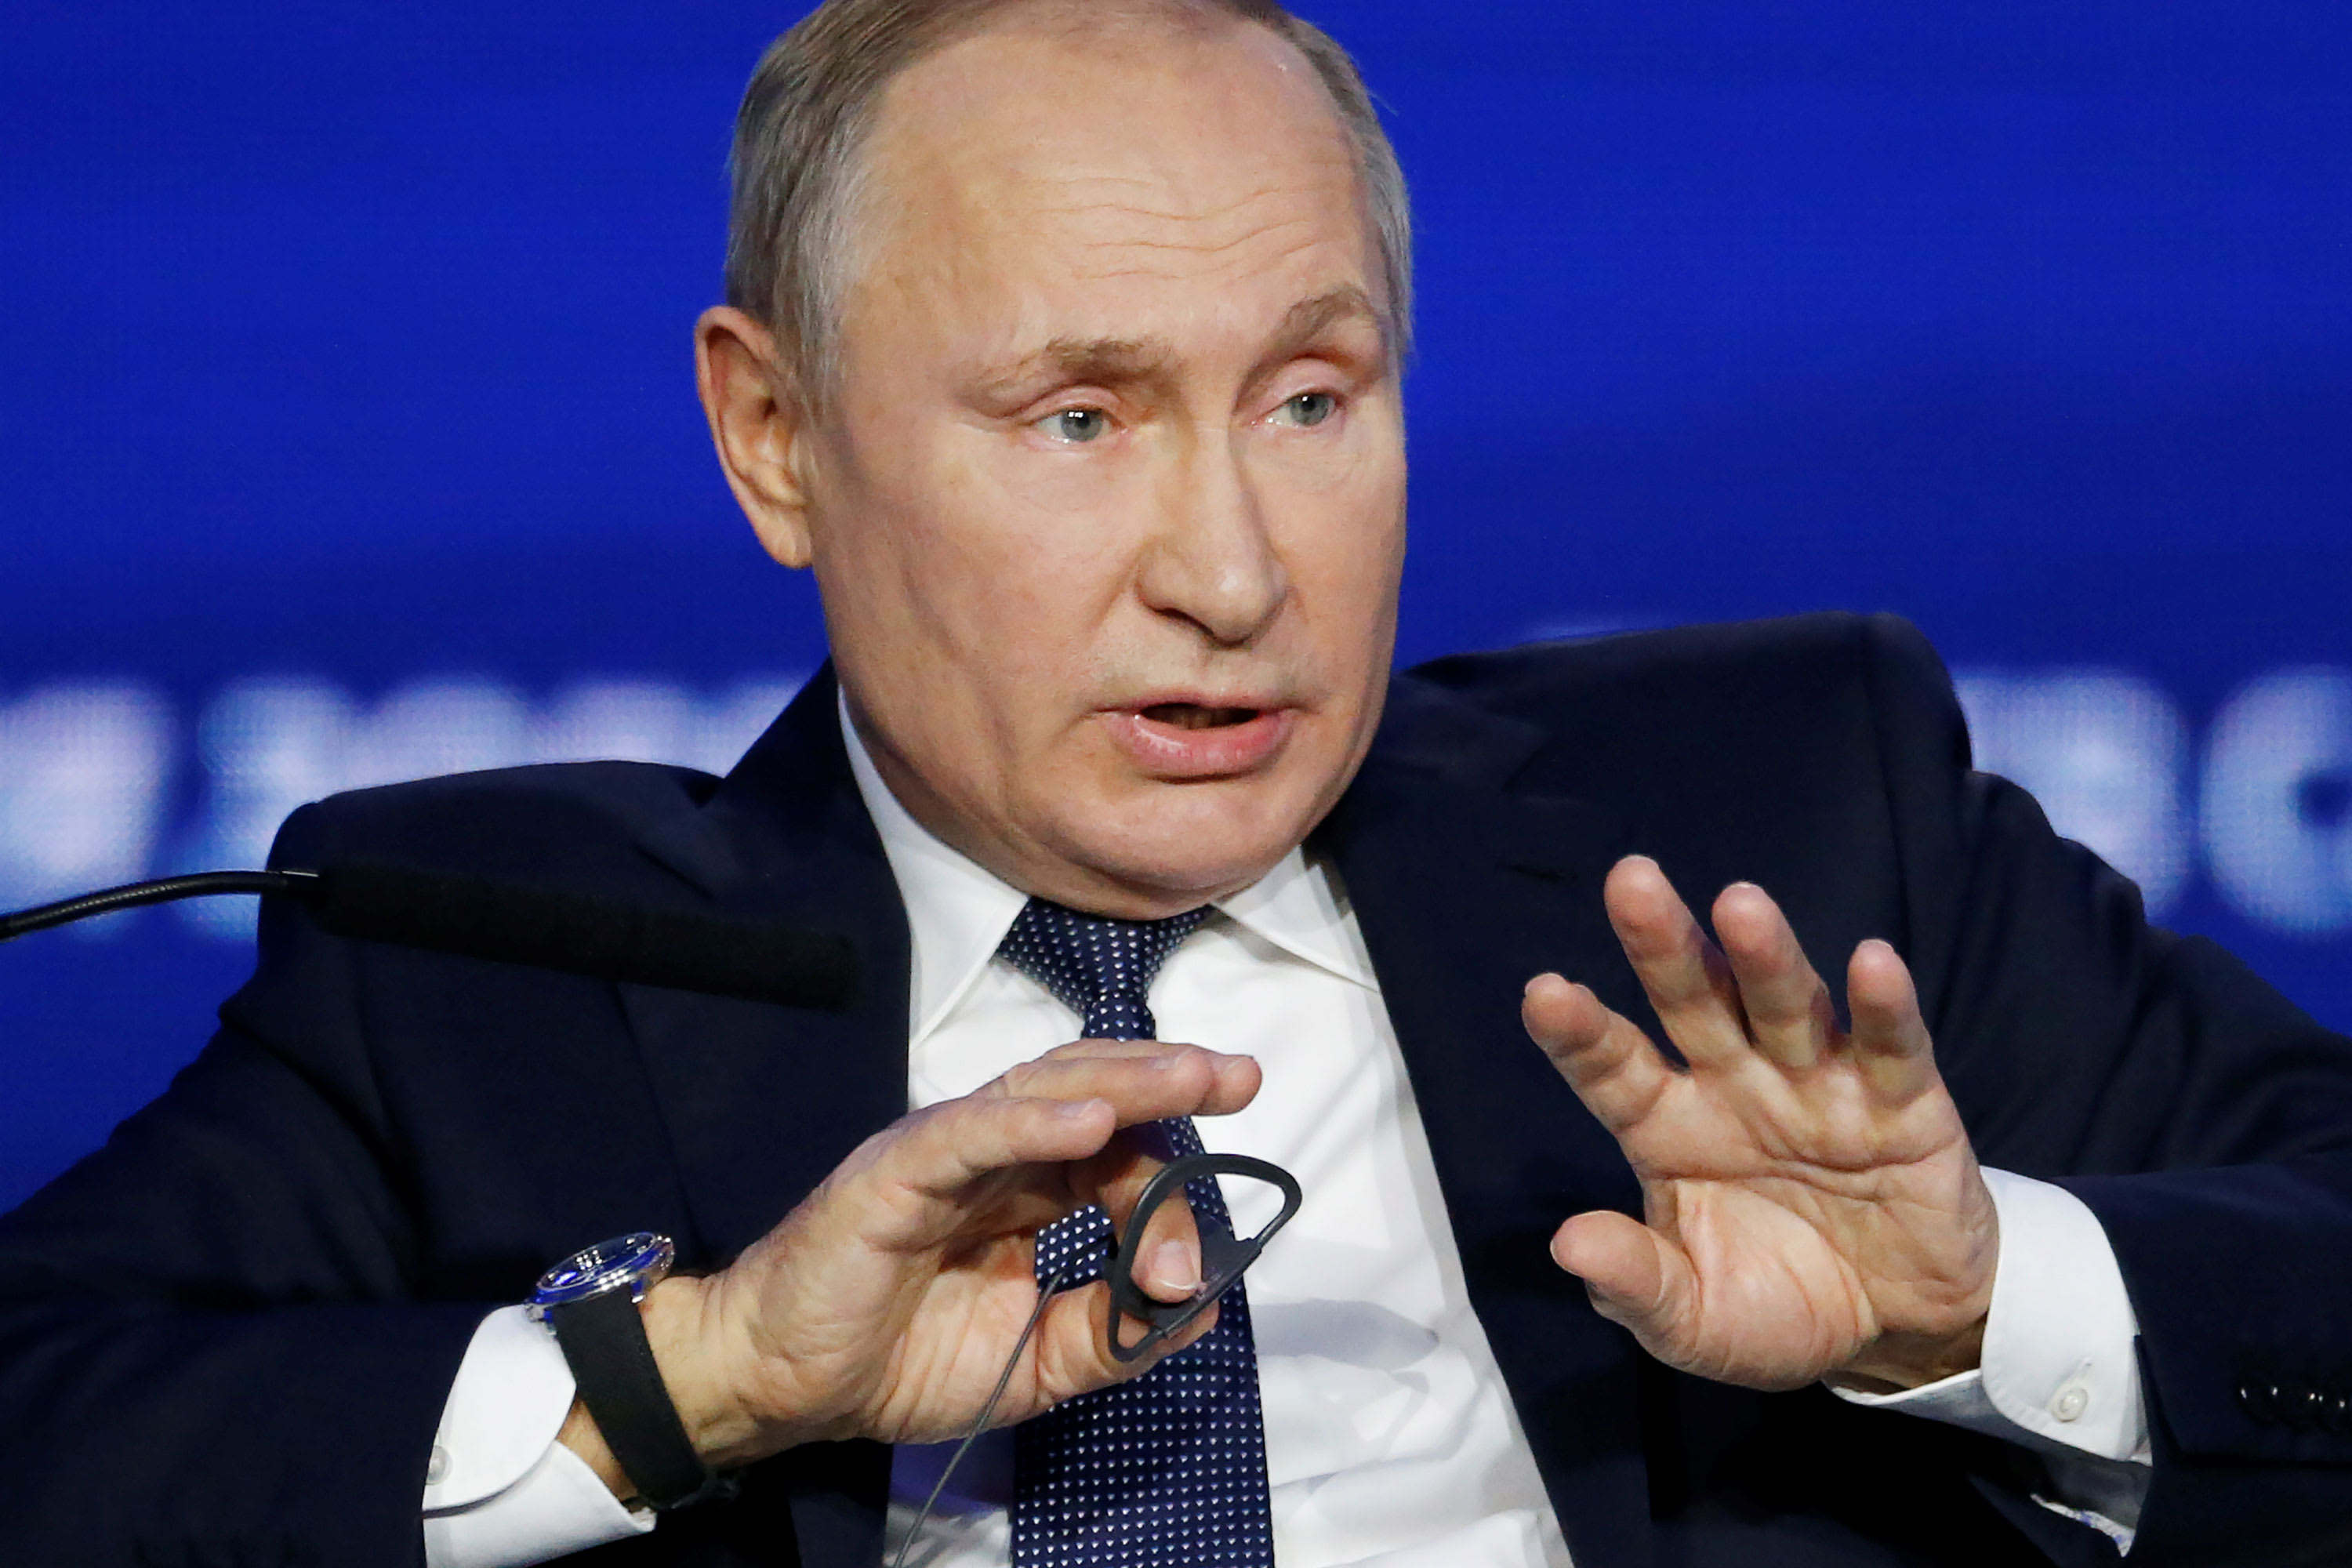 Russia has always had 'great respect' for the US, Putin says